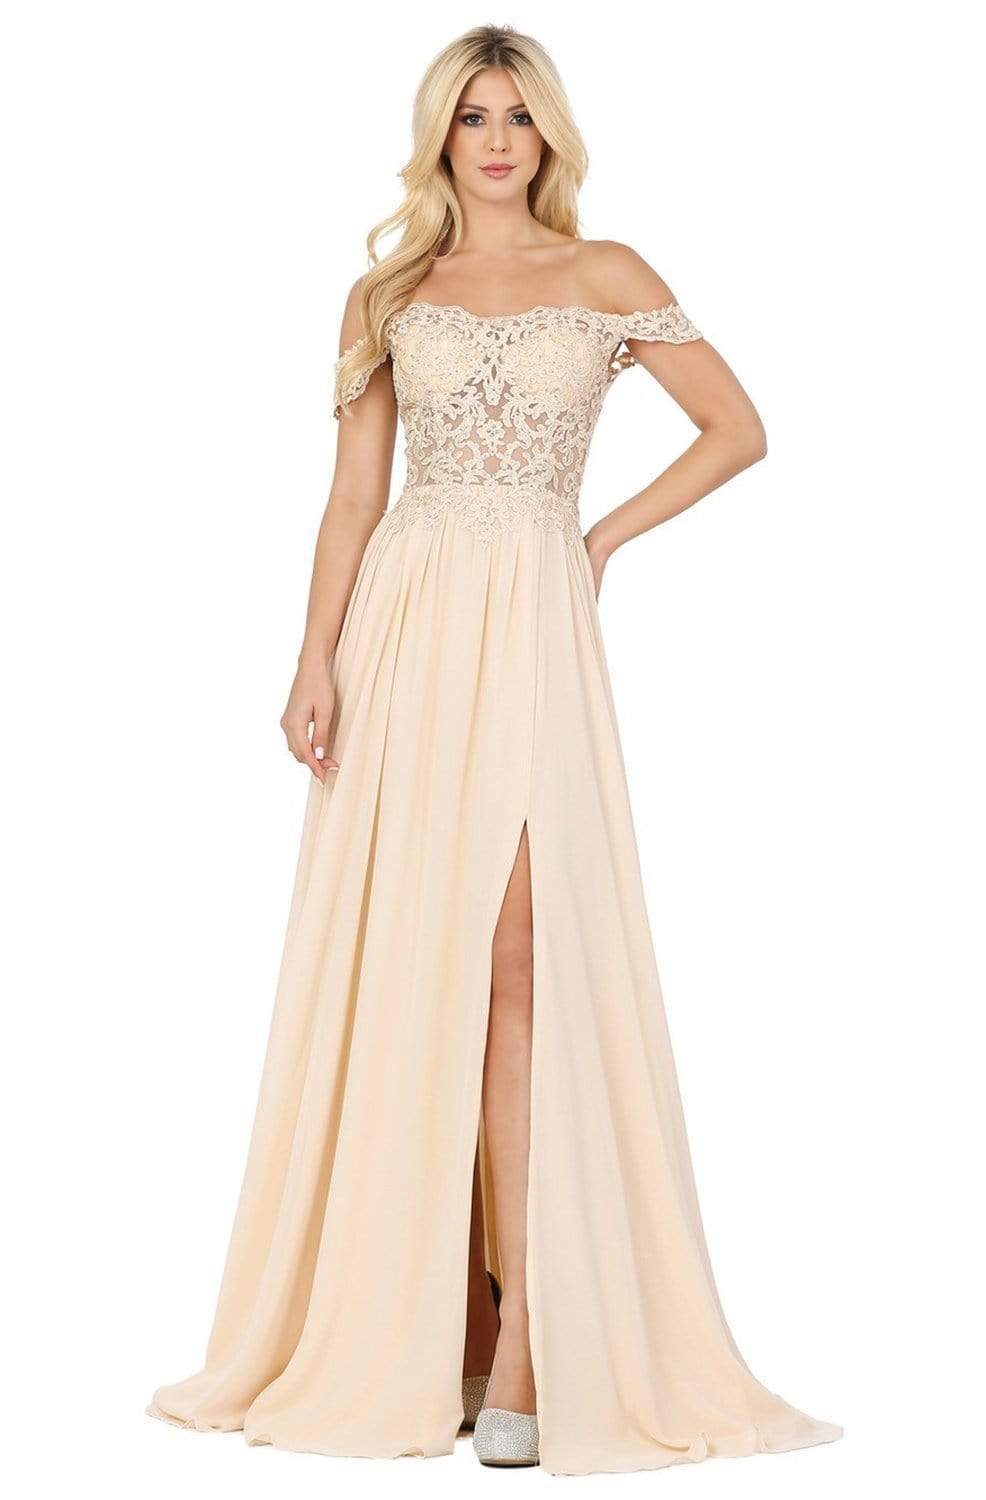 Image of Dancing Queen - 2933 Beaded Lace Applique Bodice High Slit Prom Dress